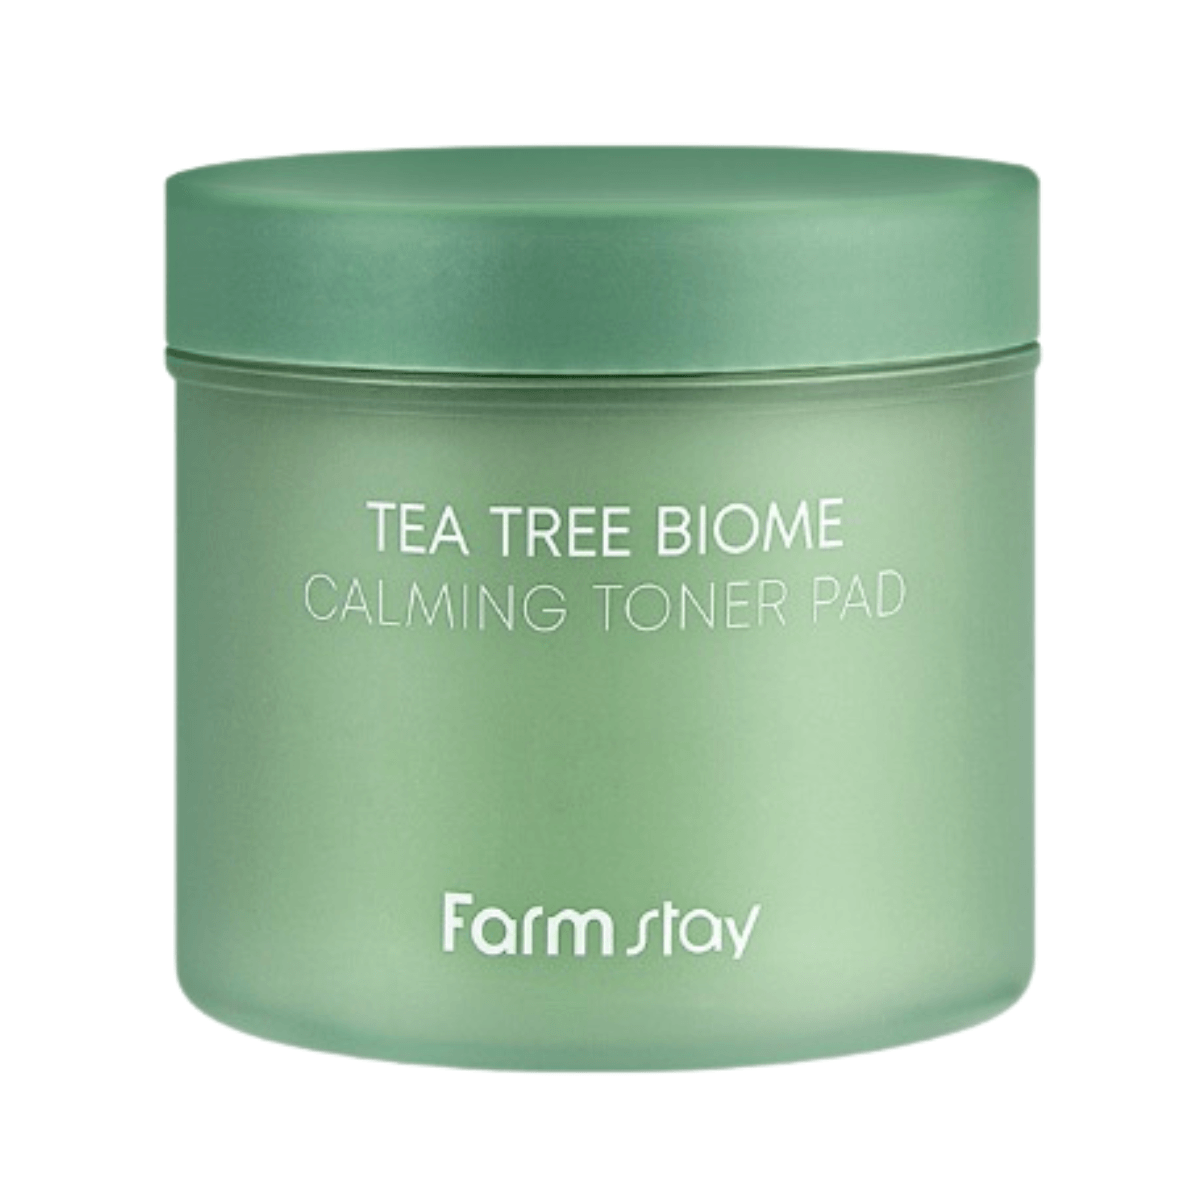 Farmstay Tea Tree Biome Calming Toner Pad: Soothes, moisturizes, and refines pores. Abundant essence, refreshing finish.